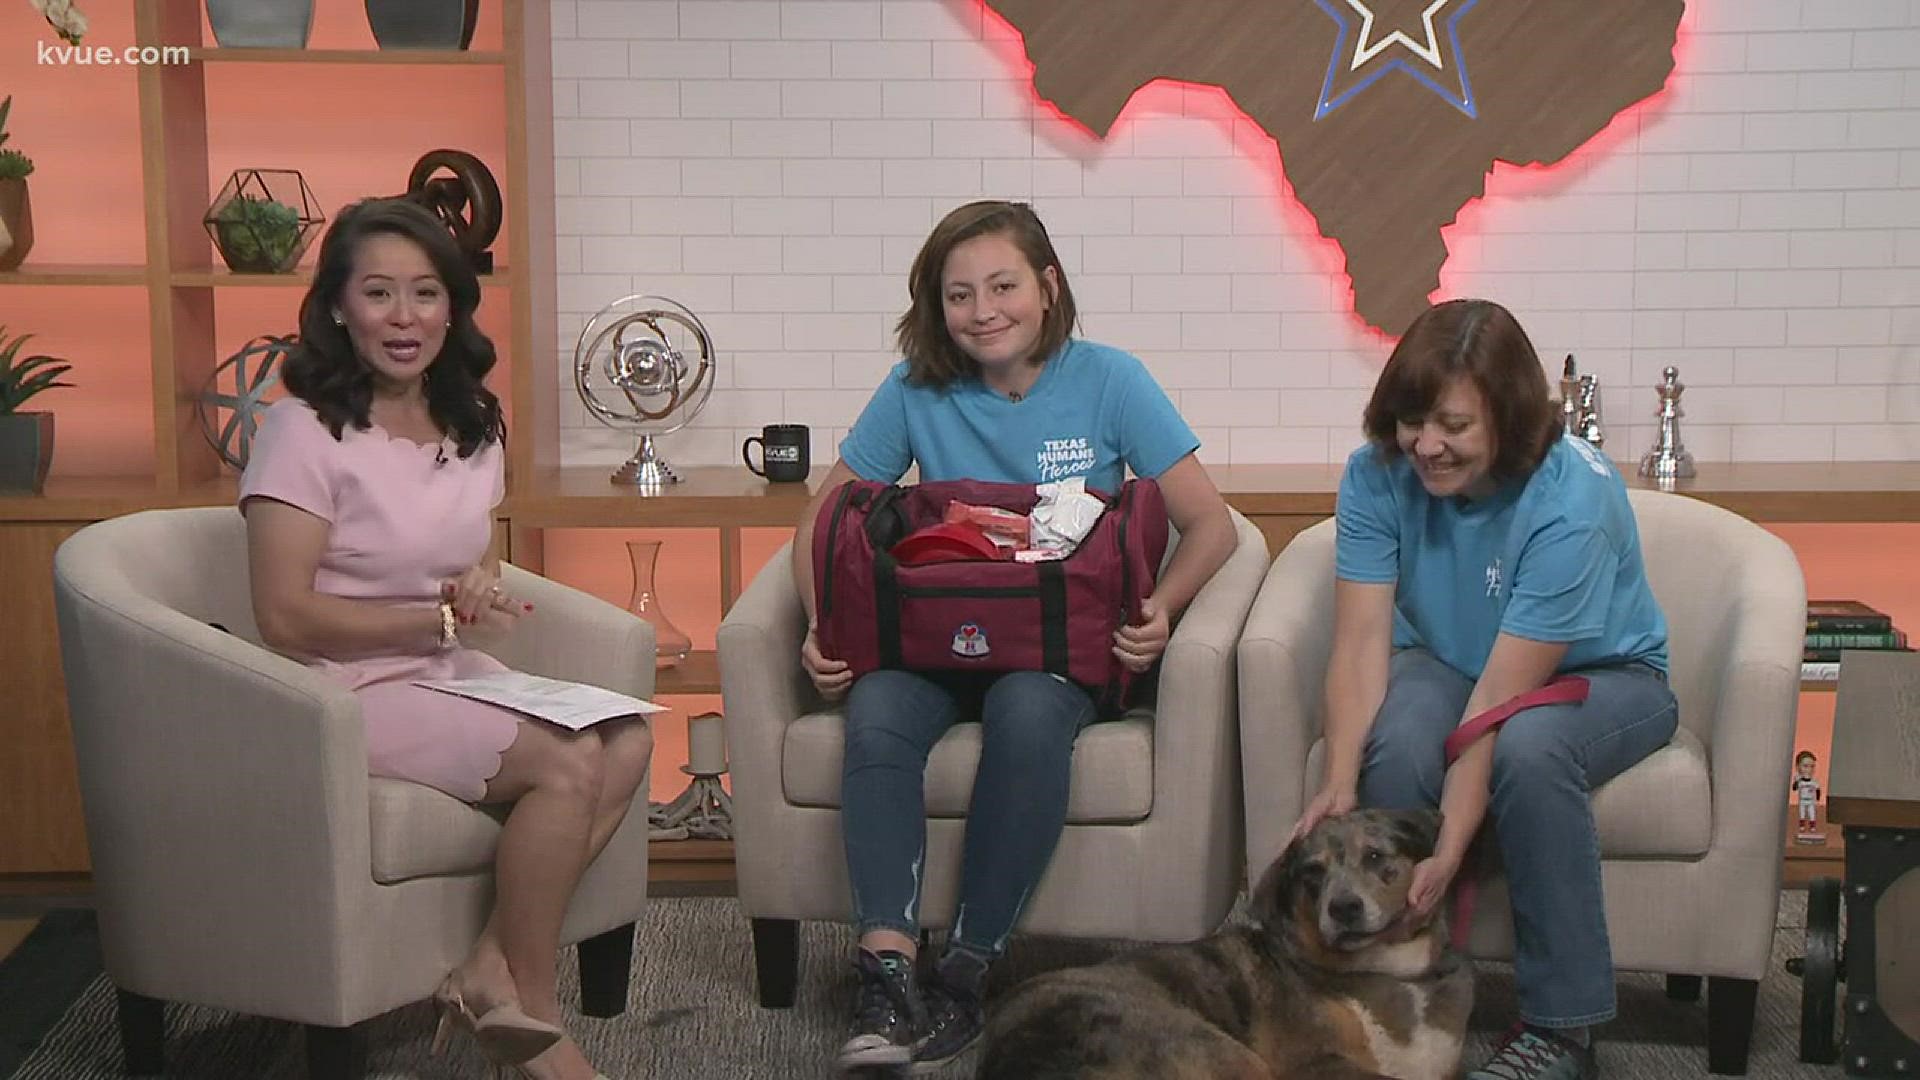 Joining us this morning is Kelly Kaelin and her daughter, Marian, with Texas Humane Heroes and they've brought along Blue today.